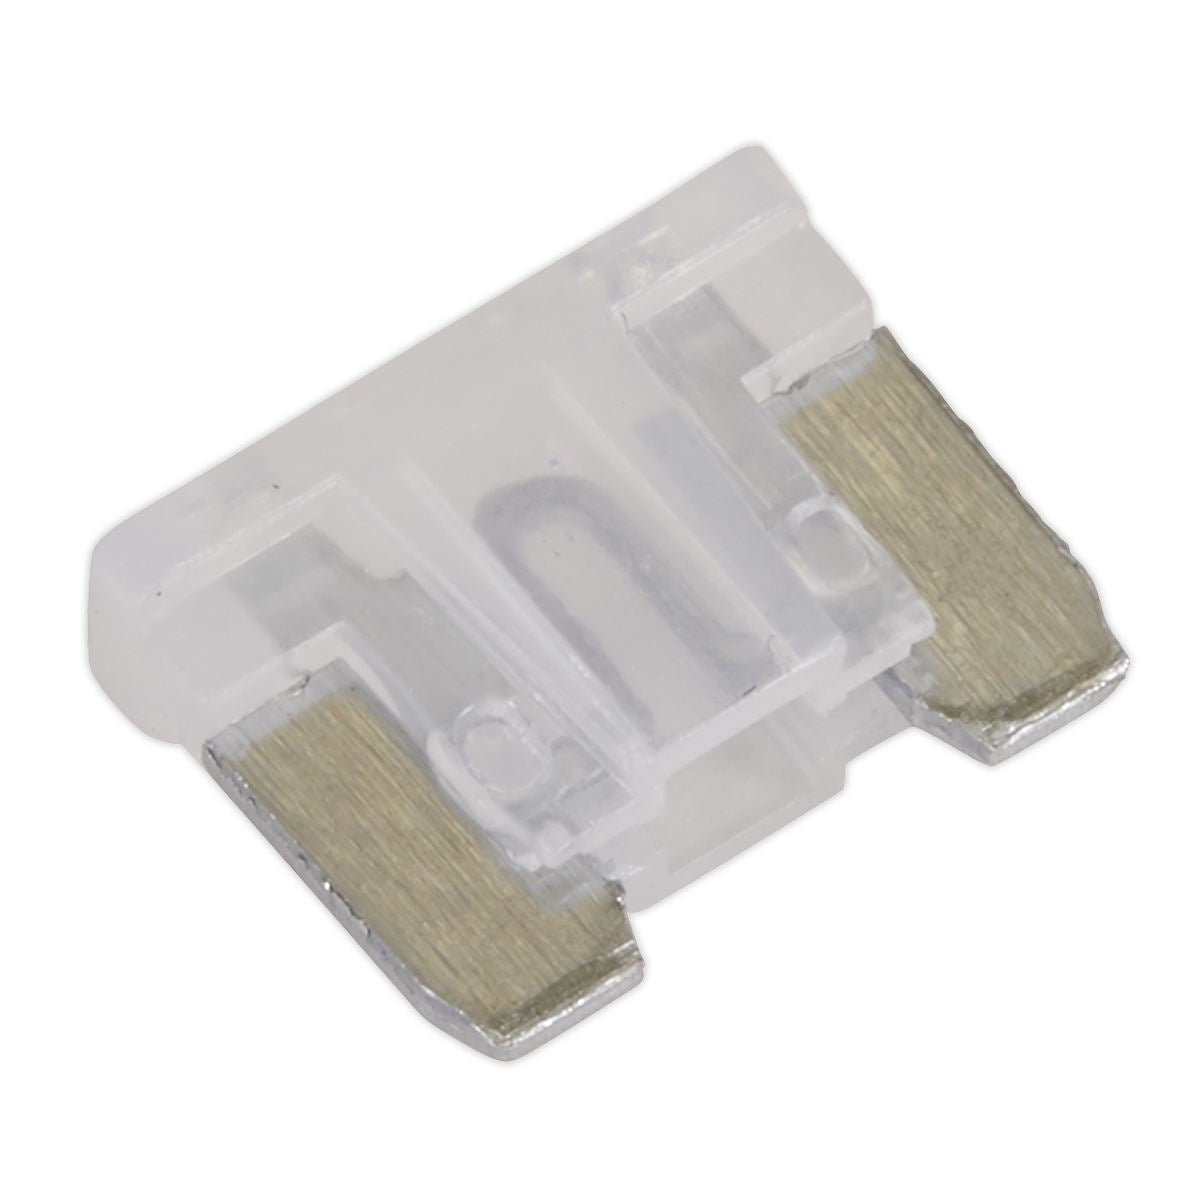 Sealey Automotive MICRO Blade Fuse 25A - Pack of 50